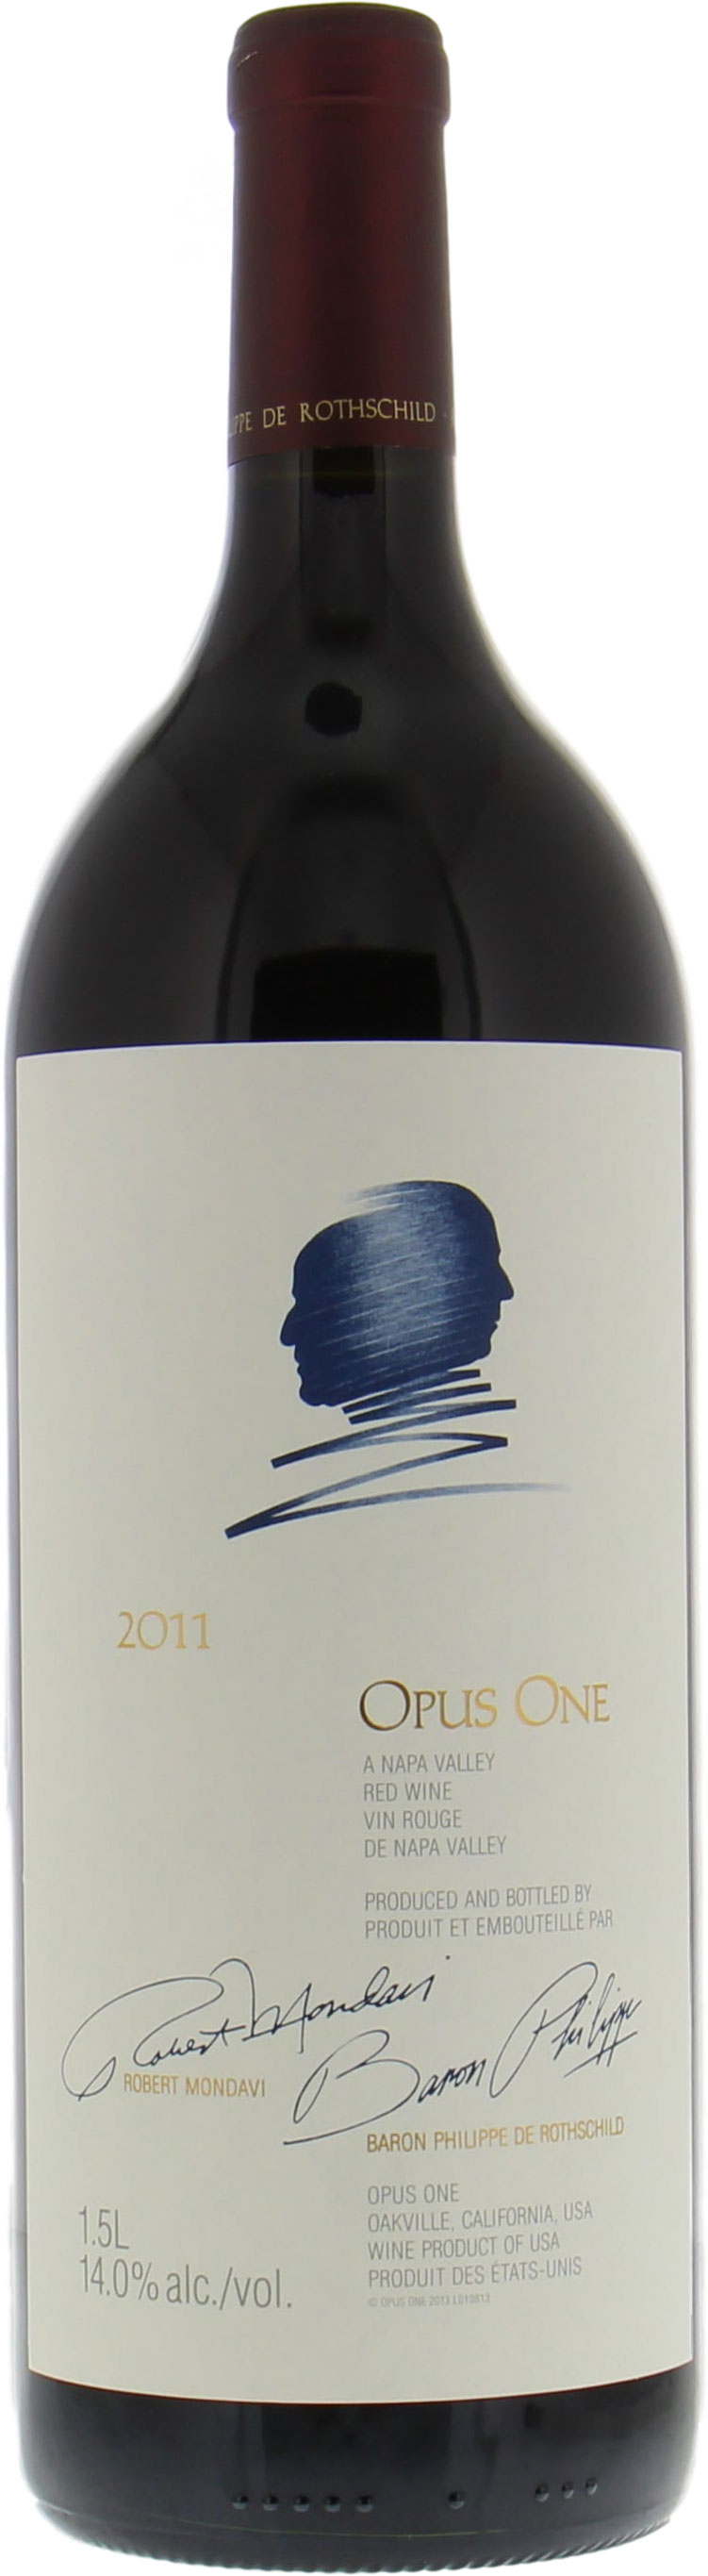 Opus One - Proprietary Red Wine 2011 Perfect